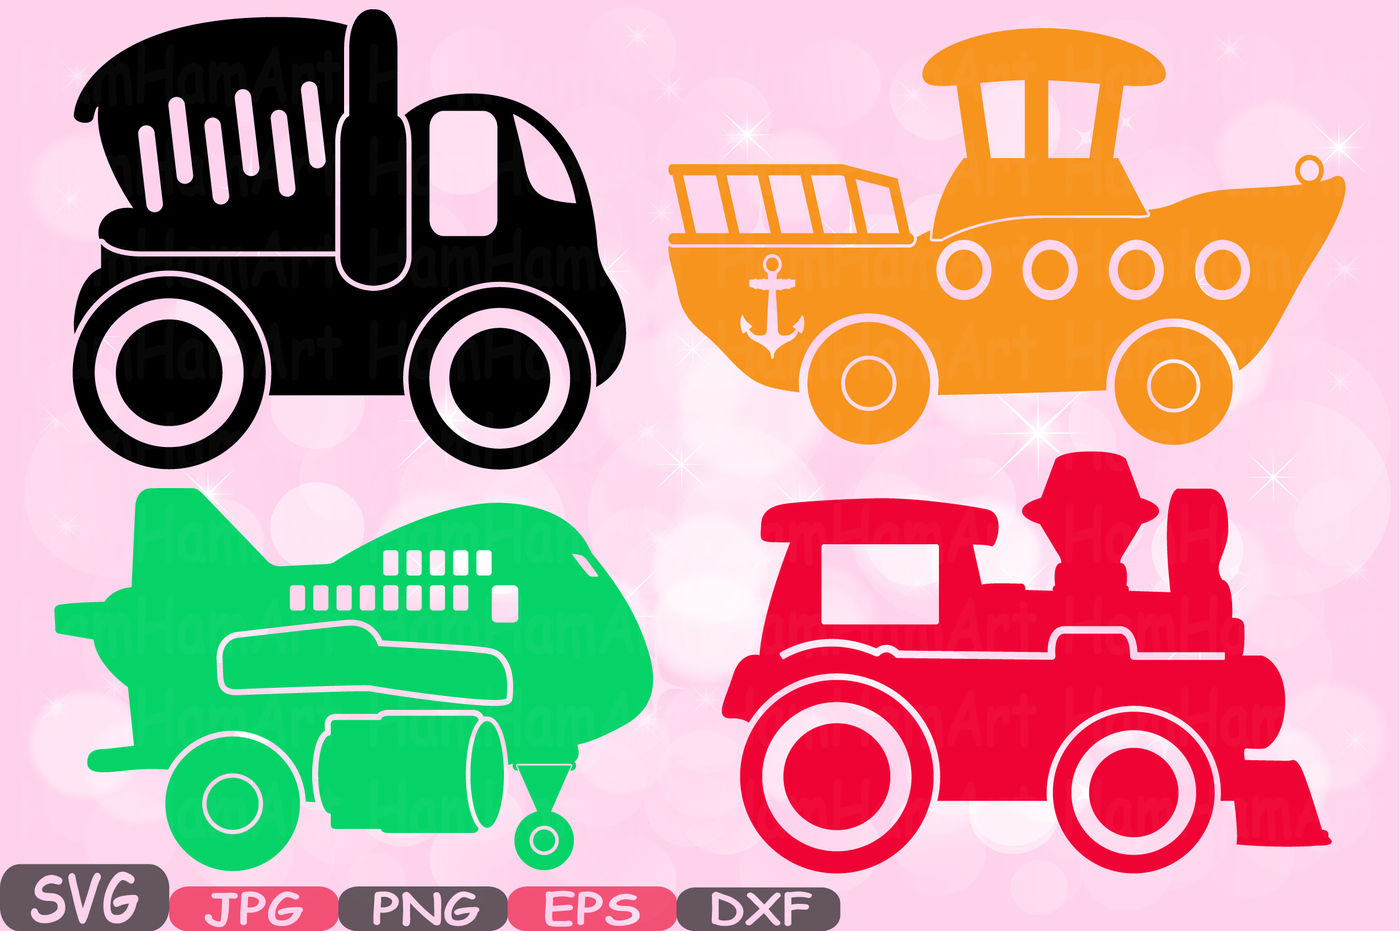 Toys Machine Silhouette Svg File Cutting Files Dump Trucks Wooden Toy Cars Airplane Boat Train Stickers School Clipart Dxf Cricut 644s By Hamhamart Thehungryjpeg Com